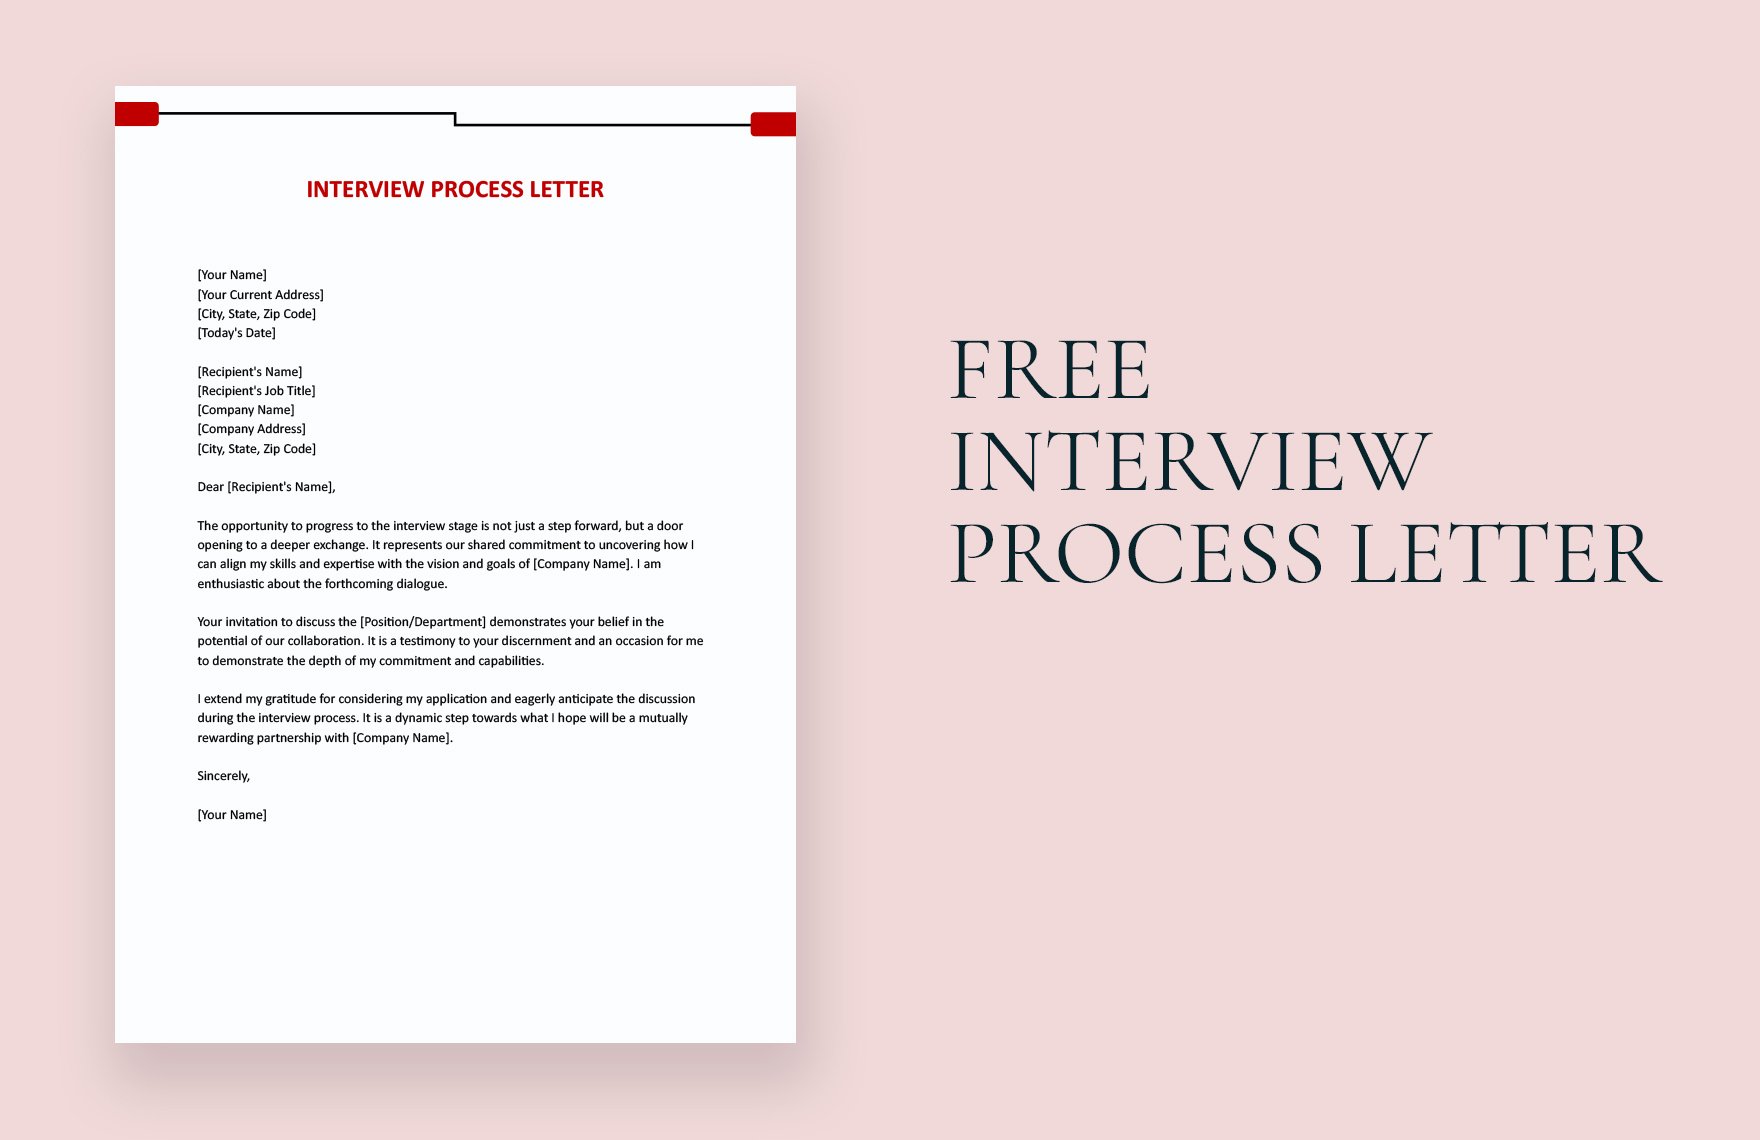 Free Interview Process Letter